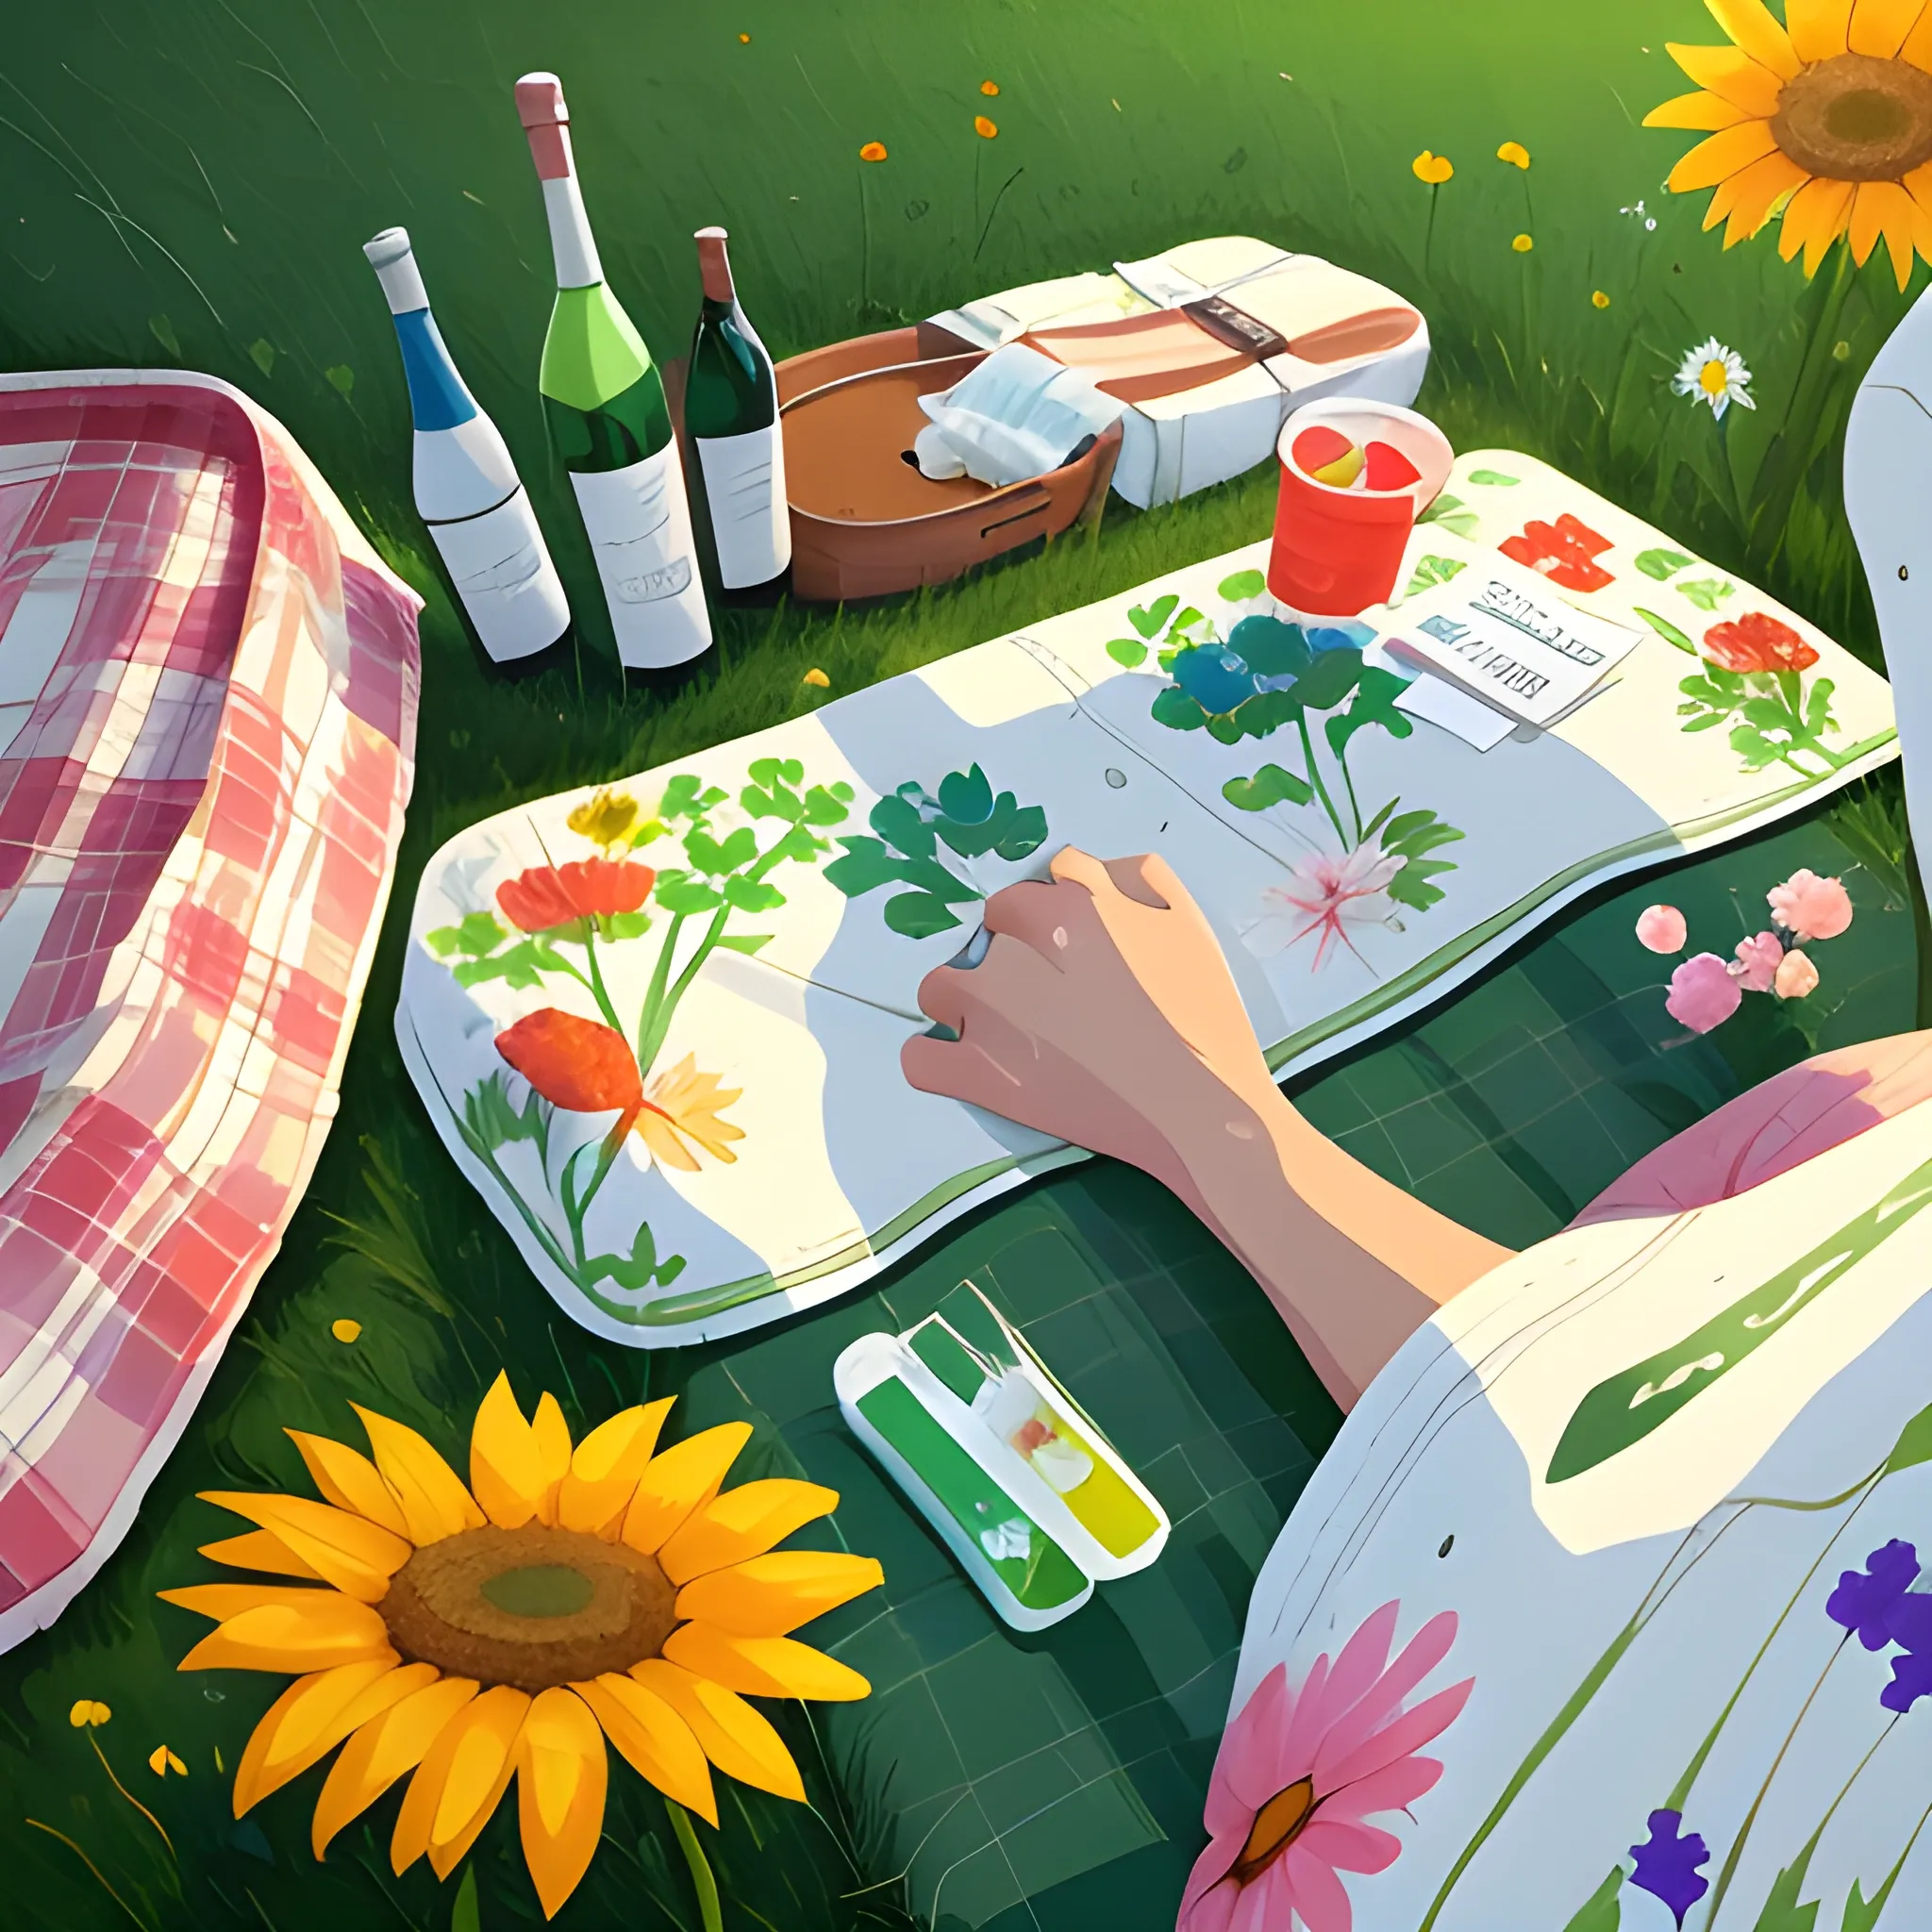 close up view of items on picnic blanket, flowers, very coherent, painted by pascal campion, painted by ryo takemasa
